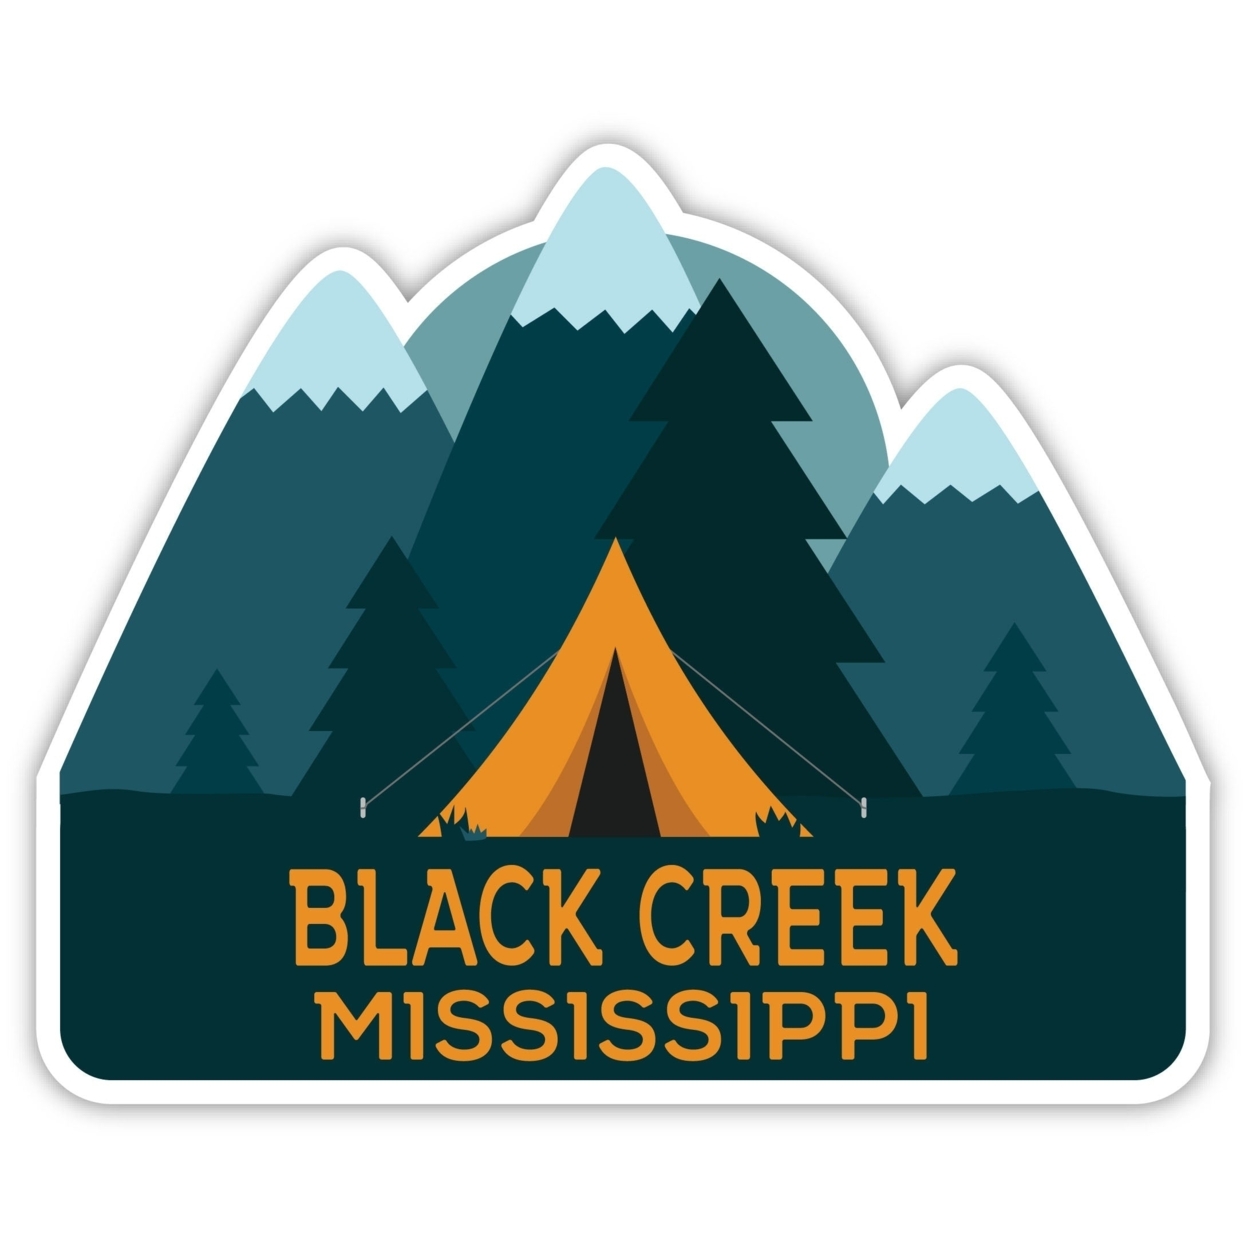 Black Creek Mississippi Souvenir Decorative Stickers (Choose Theme And Size) - 4-Pack, 10-Inch, Tent